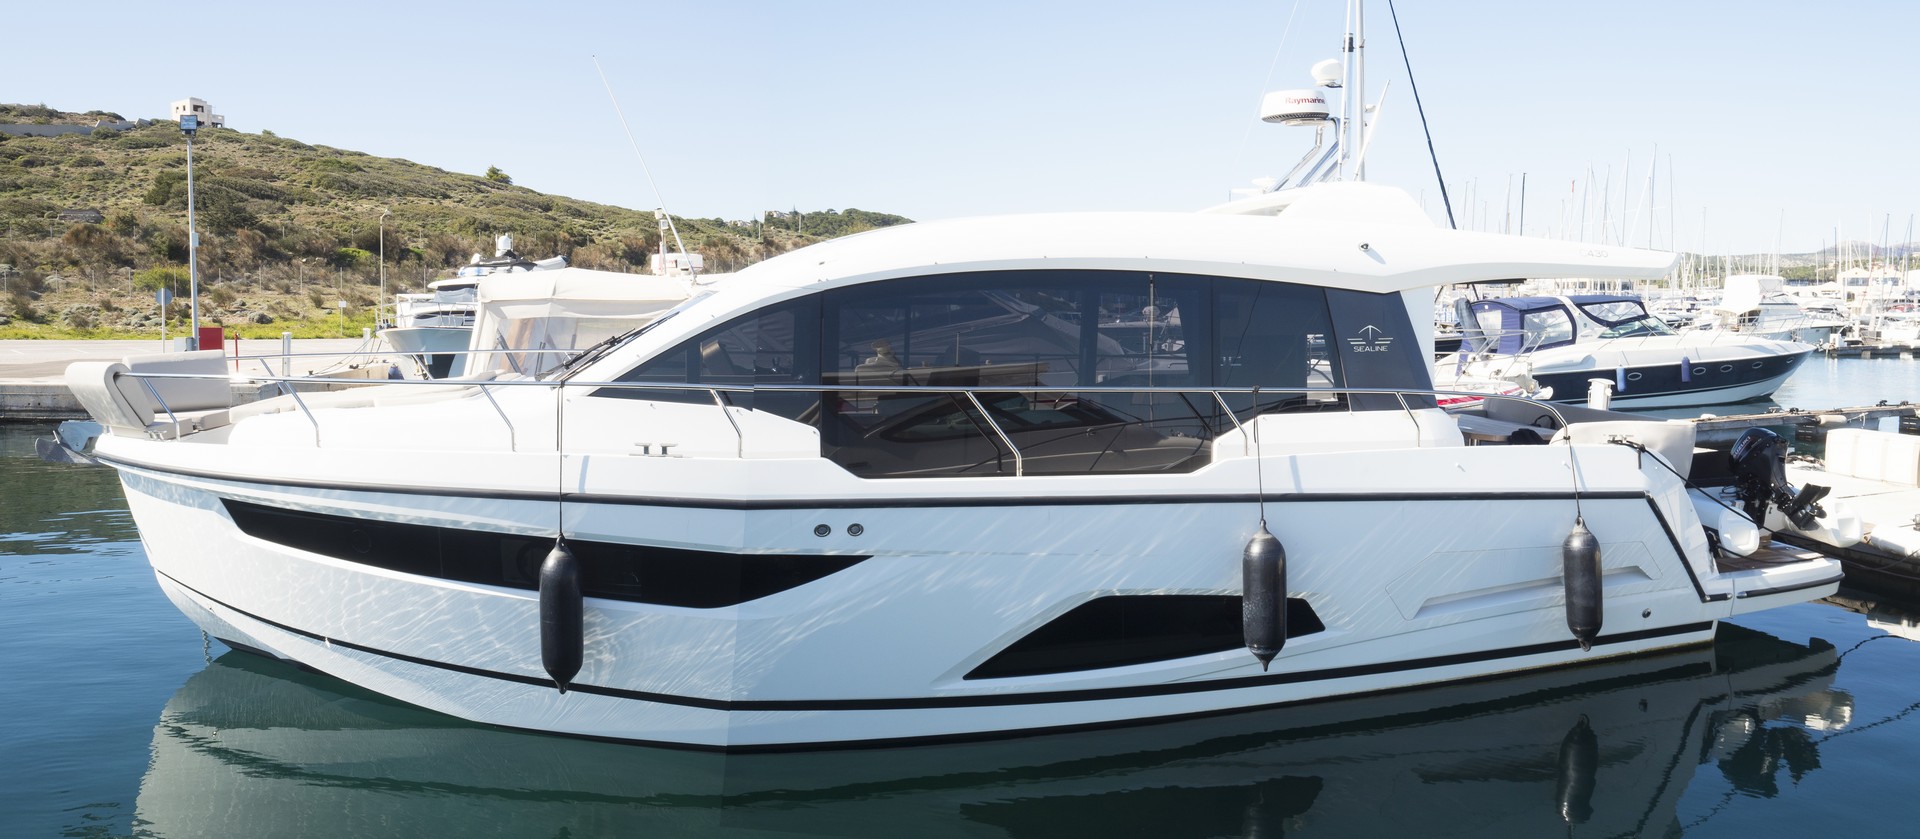 A9-first_quality_yachts